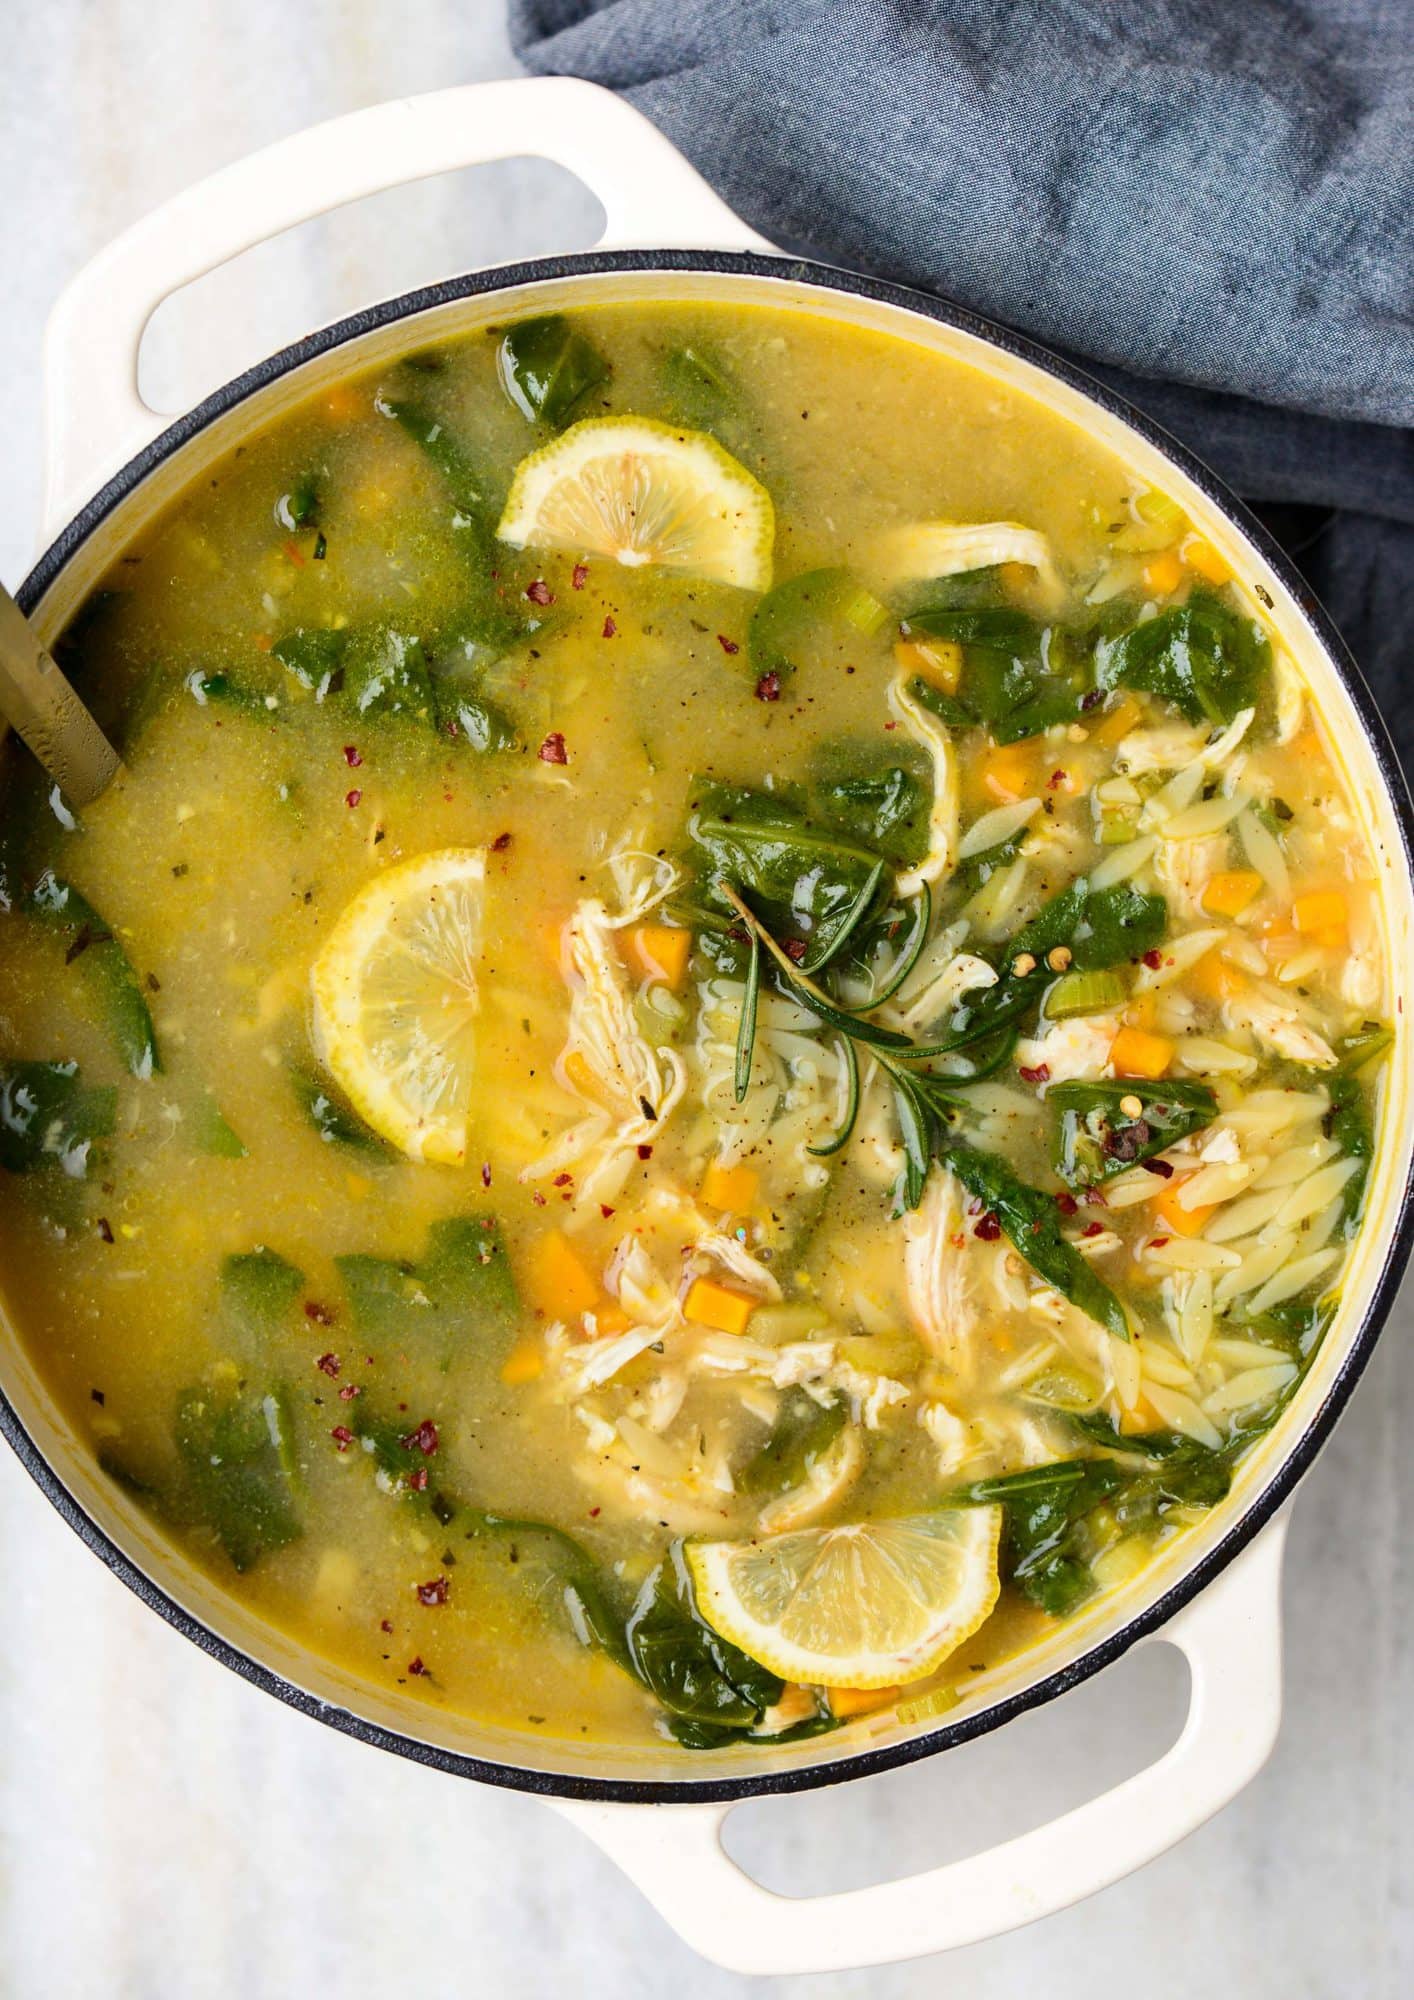 Lemon chicken orzo soup made in a dutch oven with chicken, orzo, baby spinach, celery and lemon wedges.